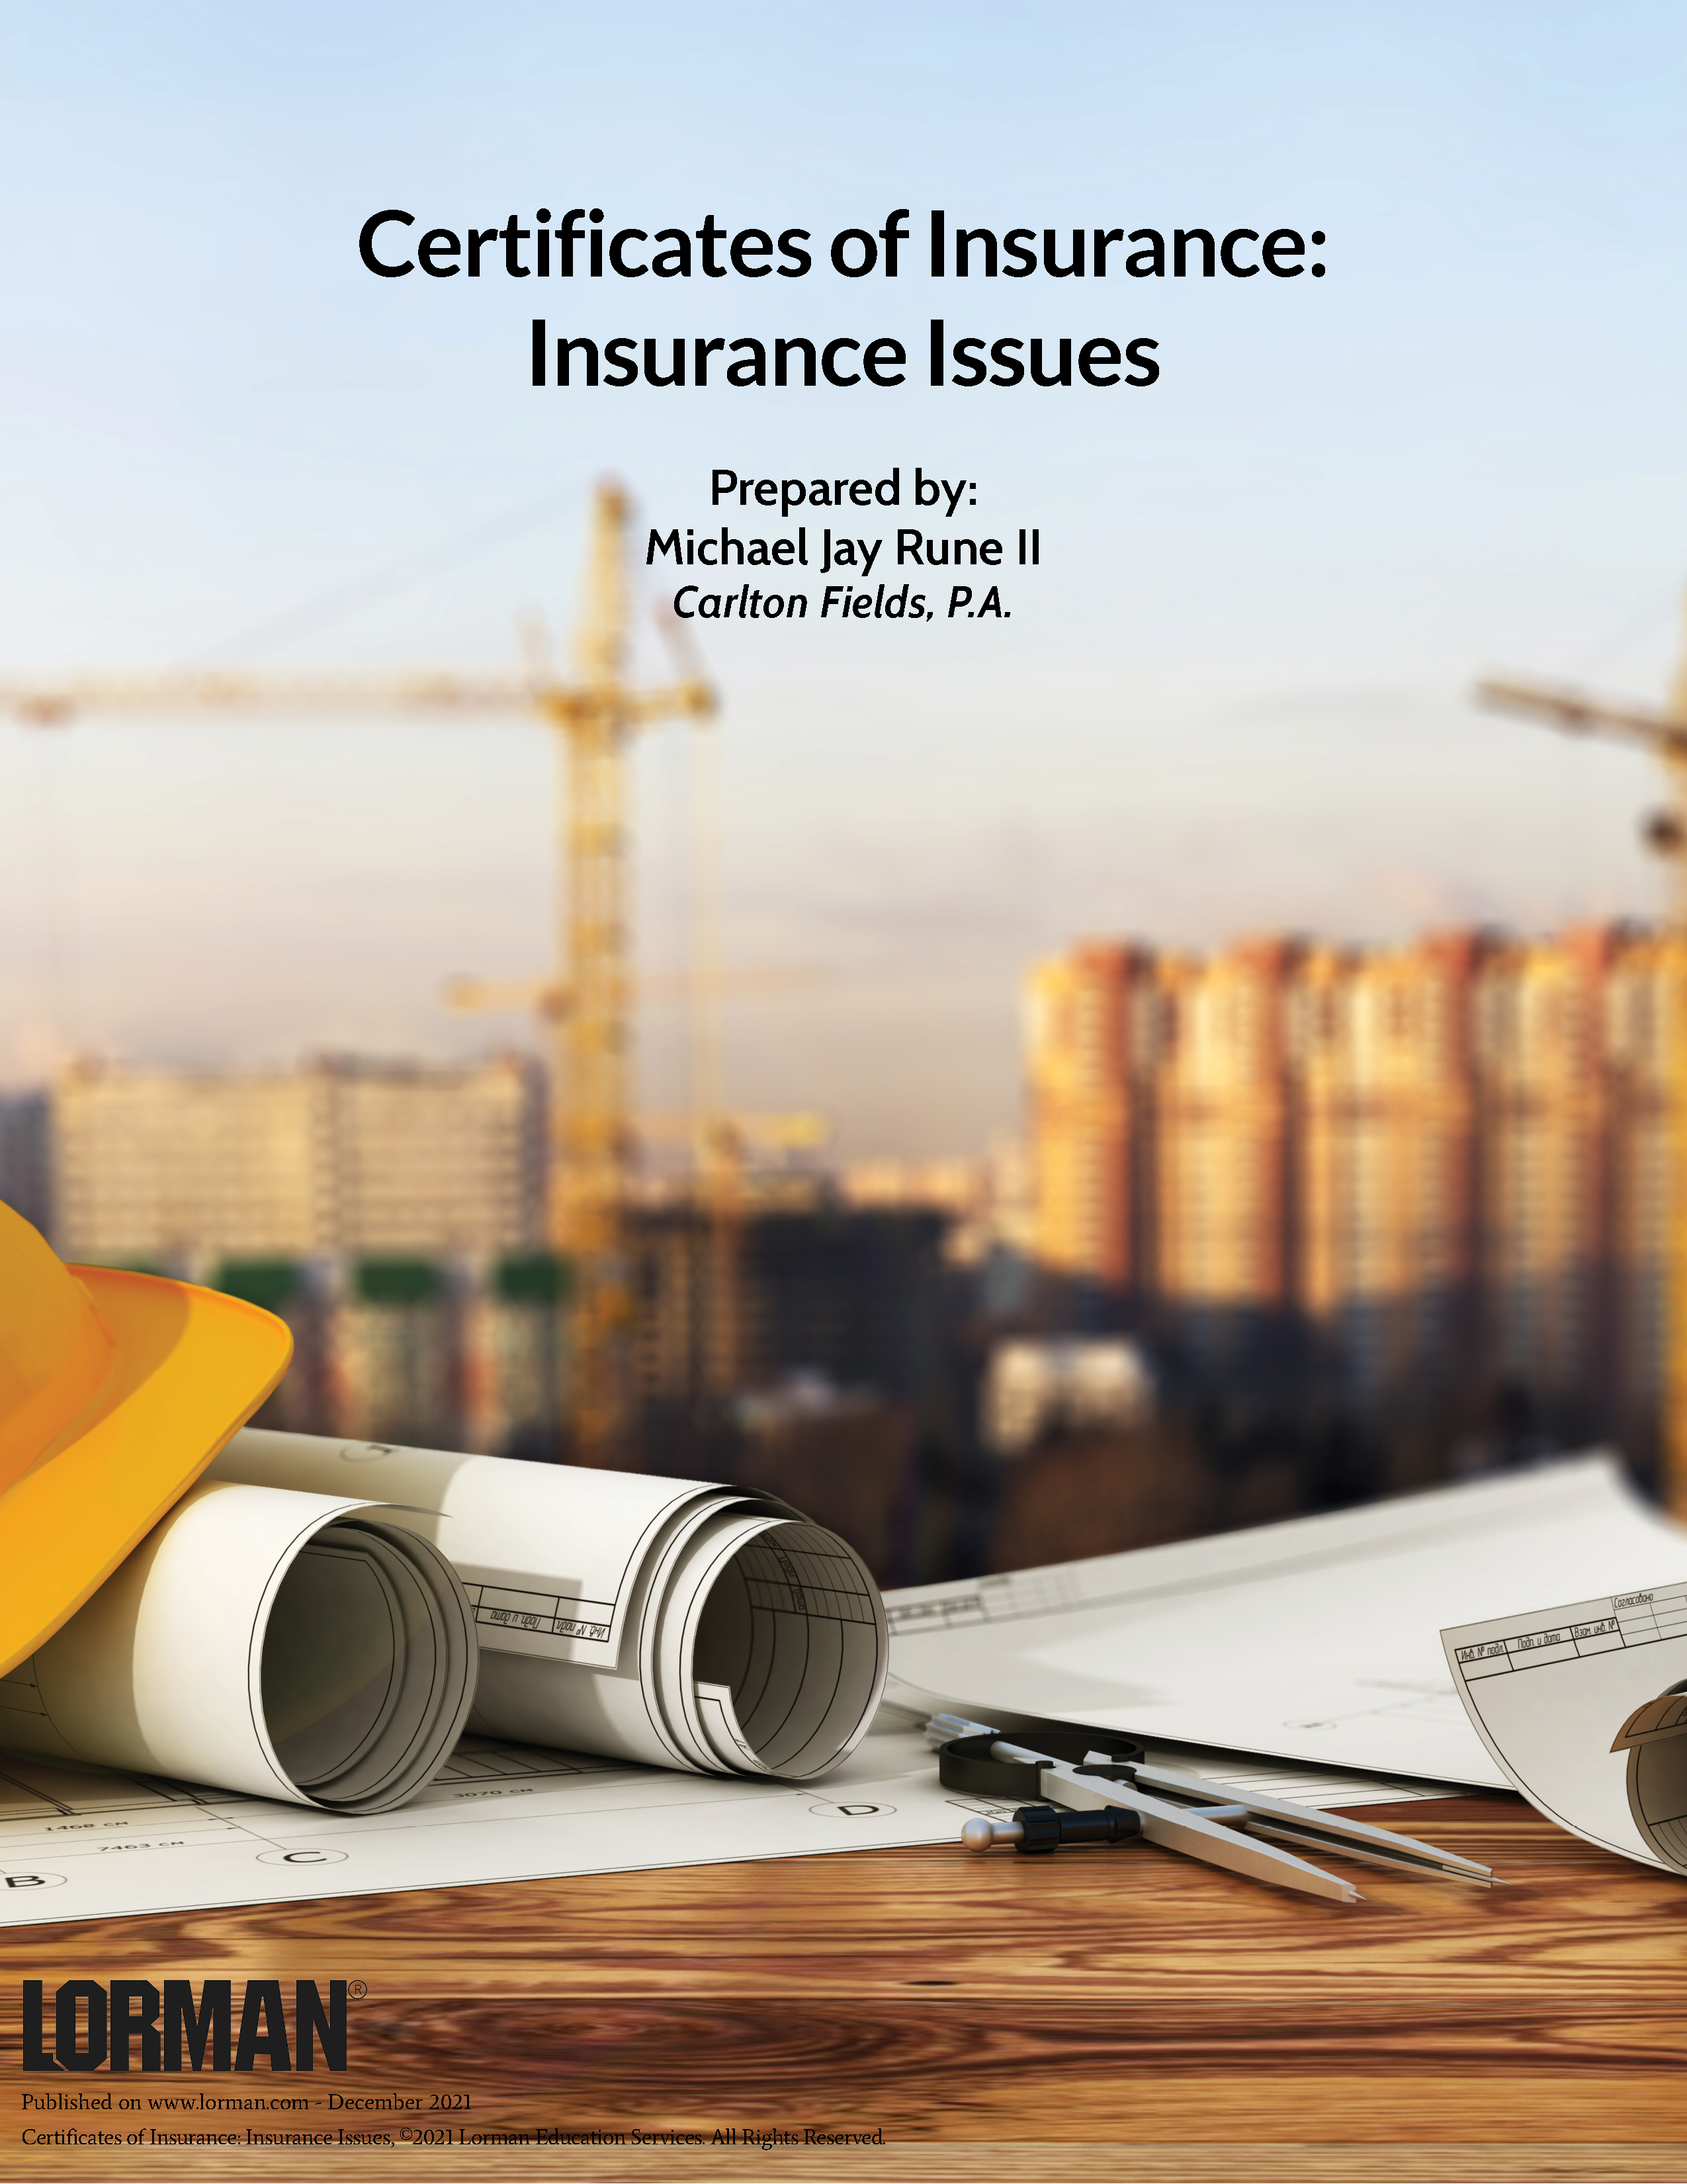 Certificates of Insurance: Insurance Issues